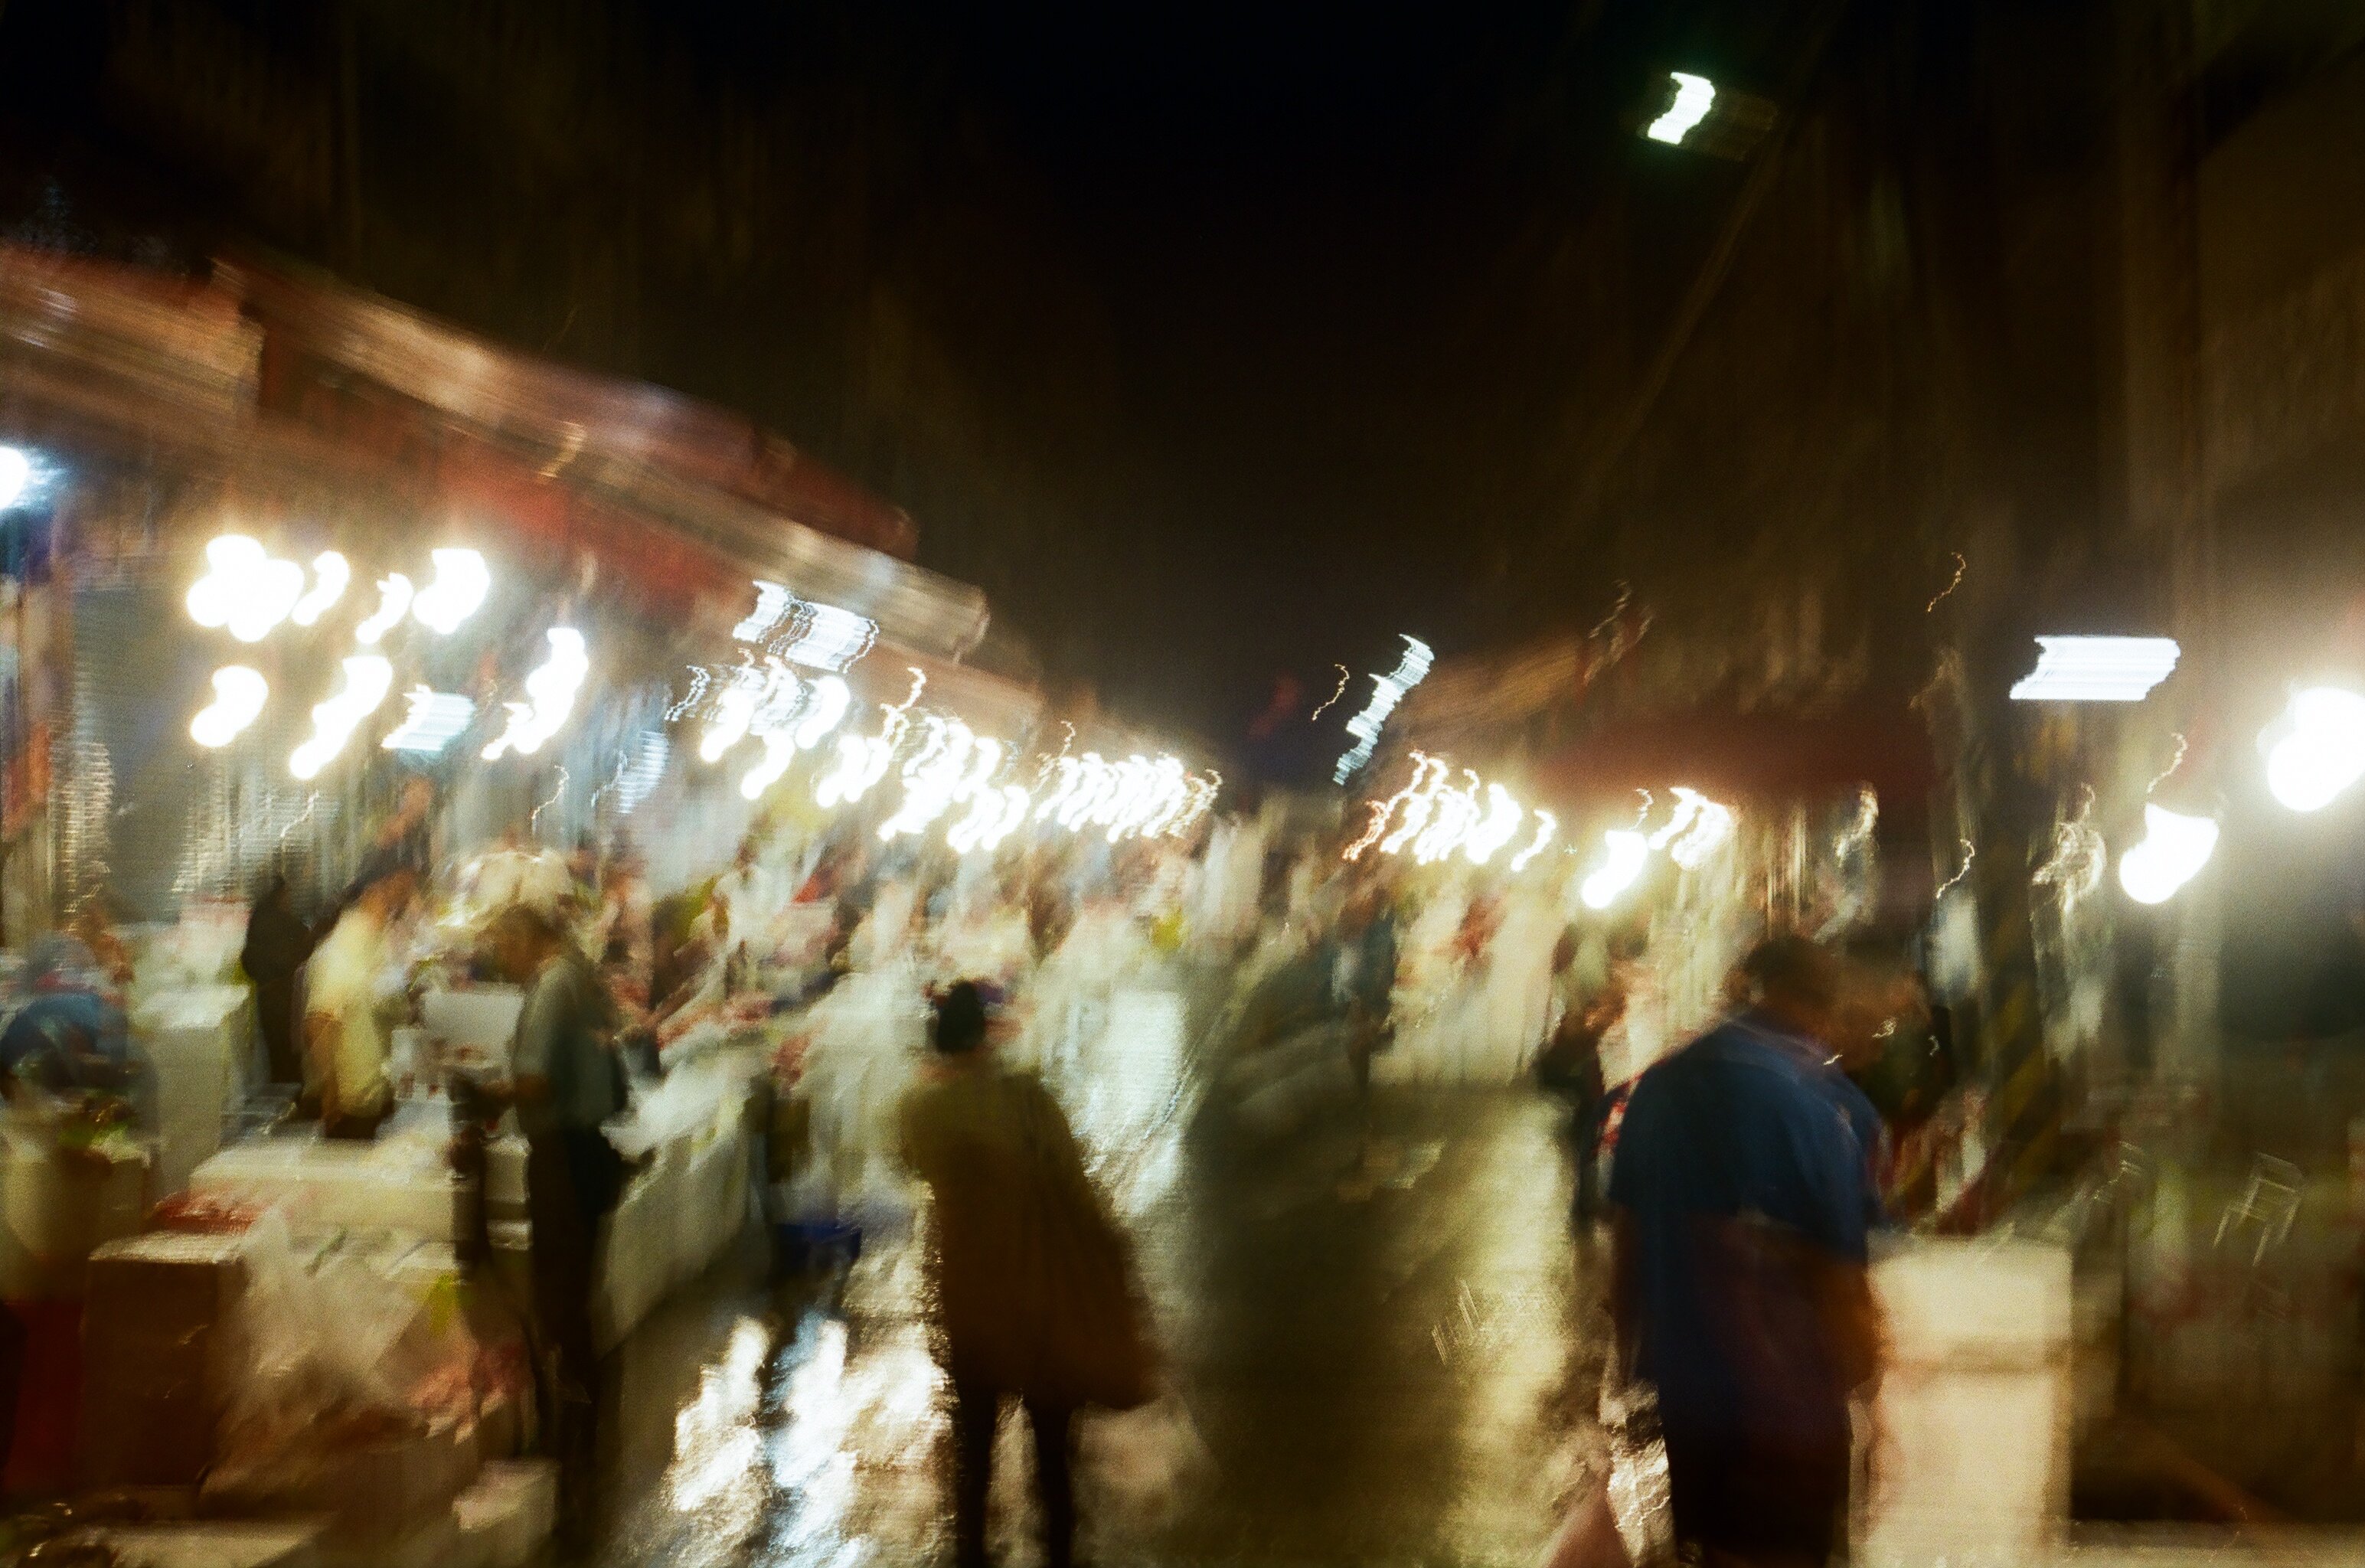 a blurry image of people walking in a fishmarket